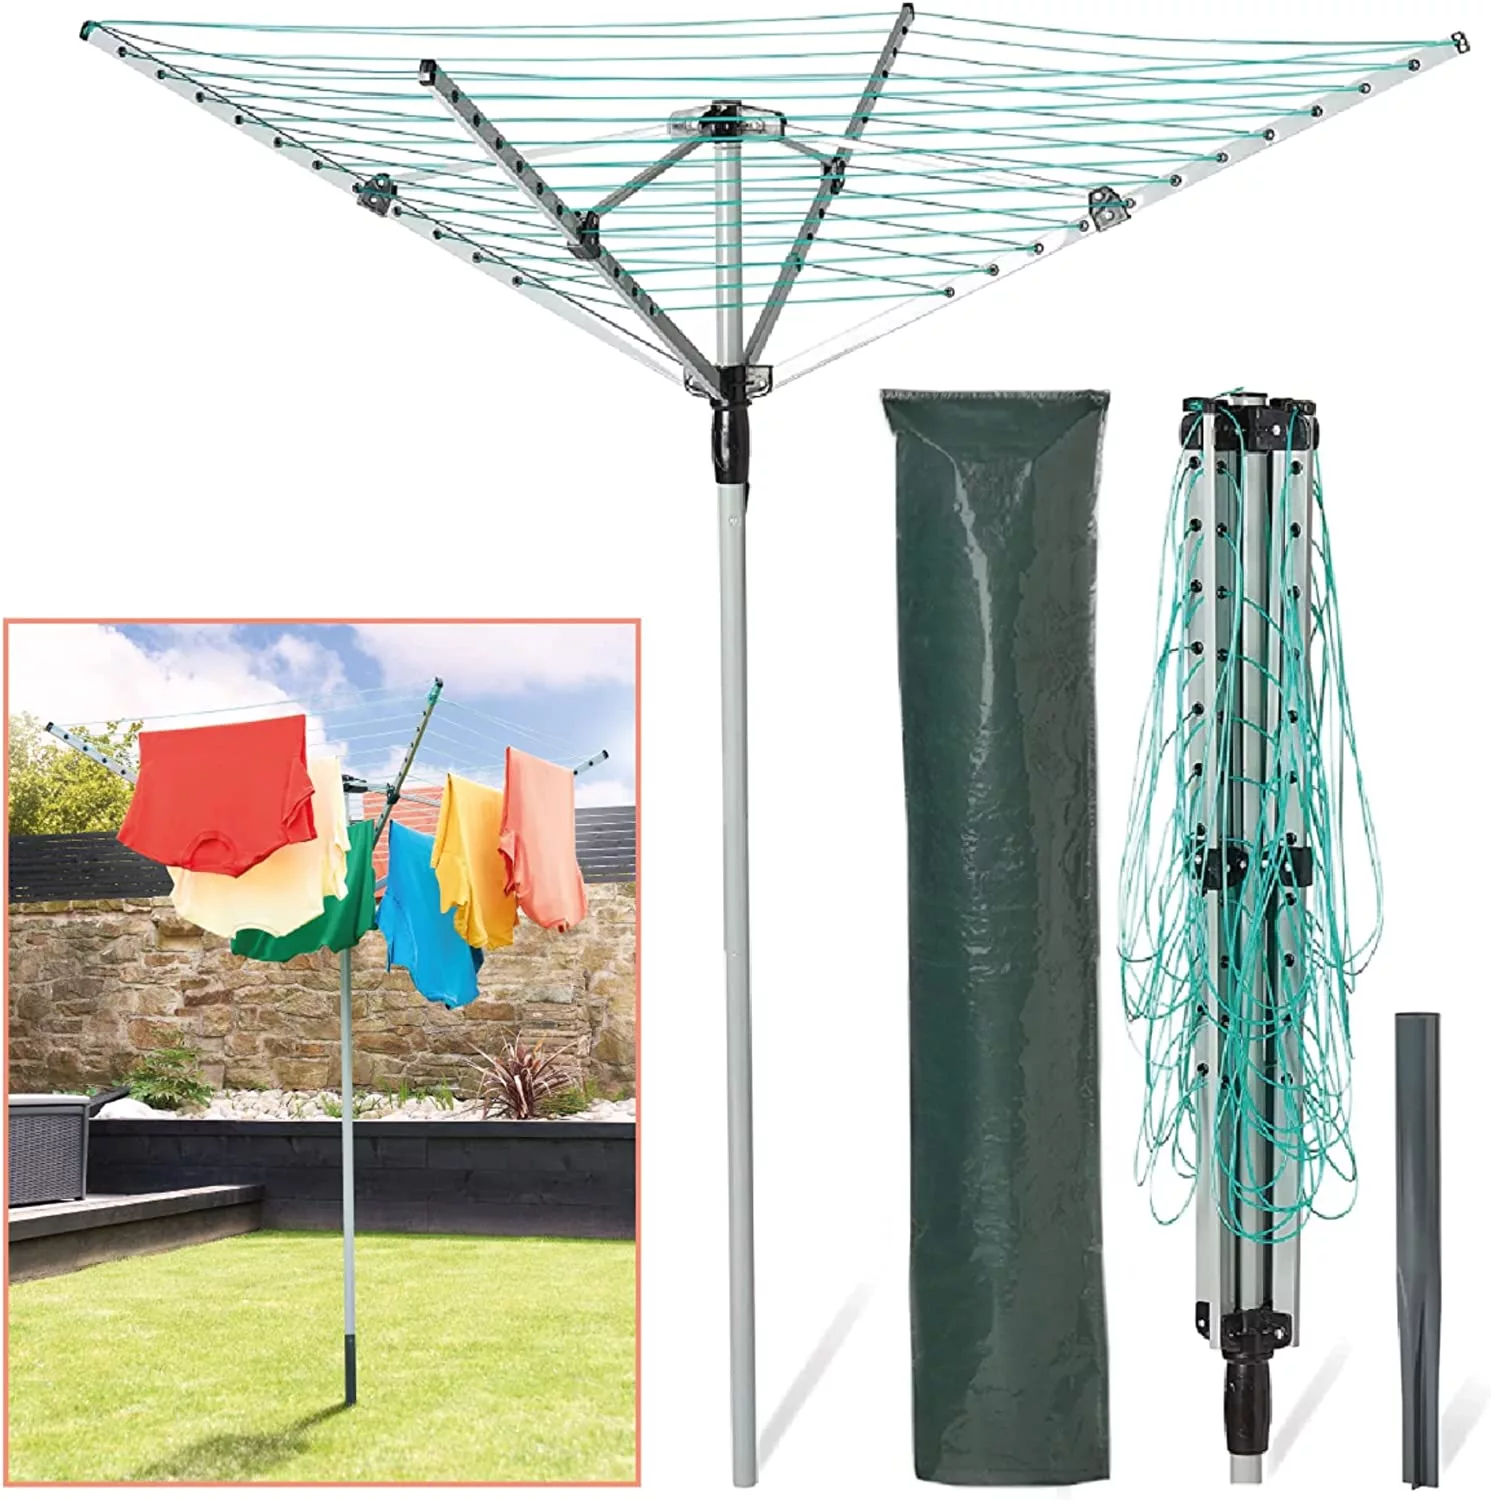 Rotary Airer Outdoor Washing Line 4 Arm - Grey / 173cm - Home Treats